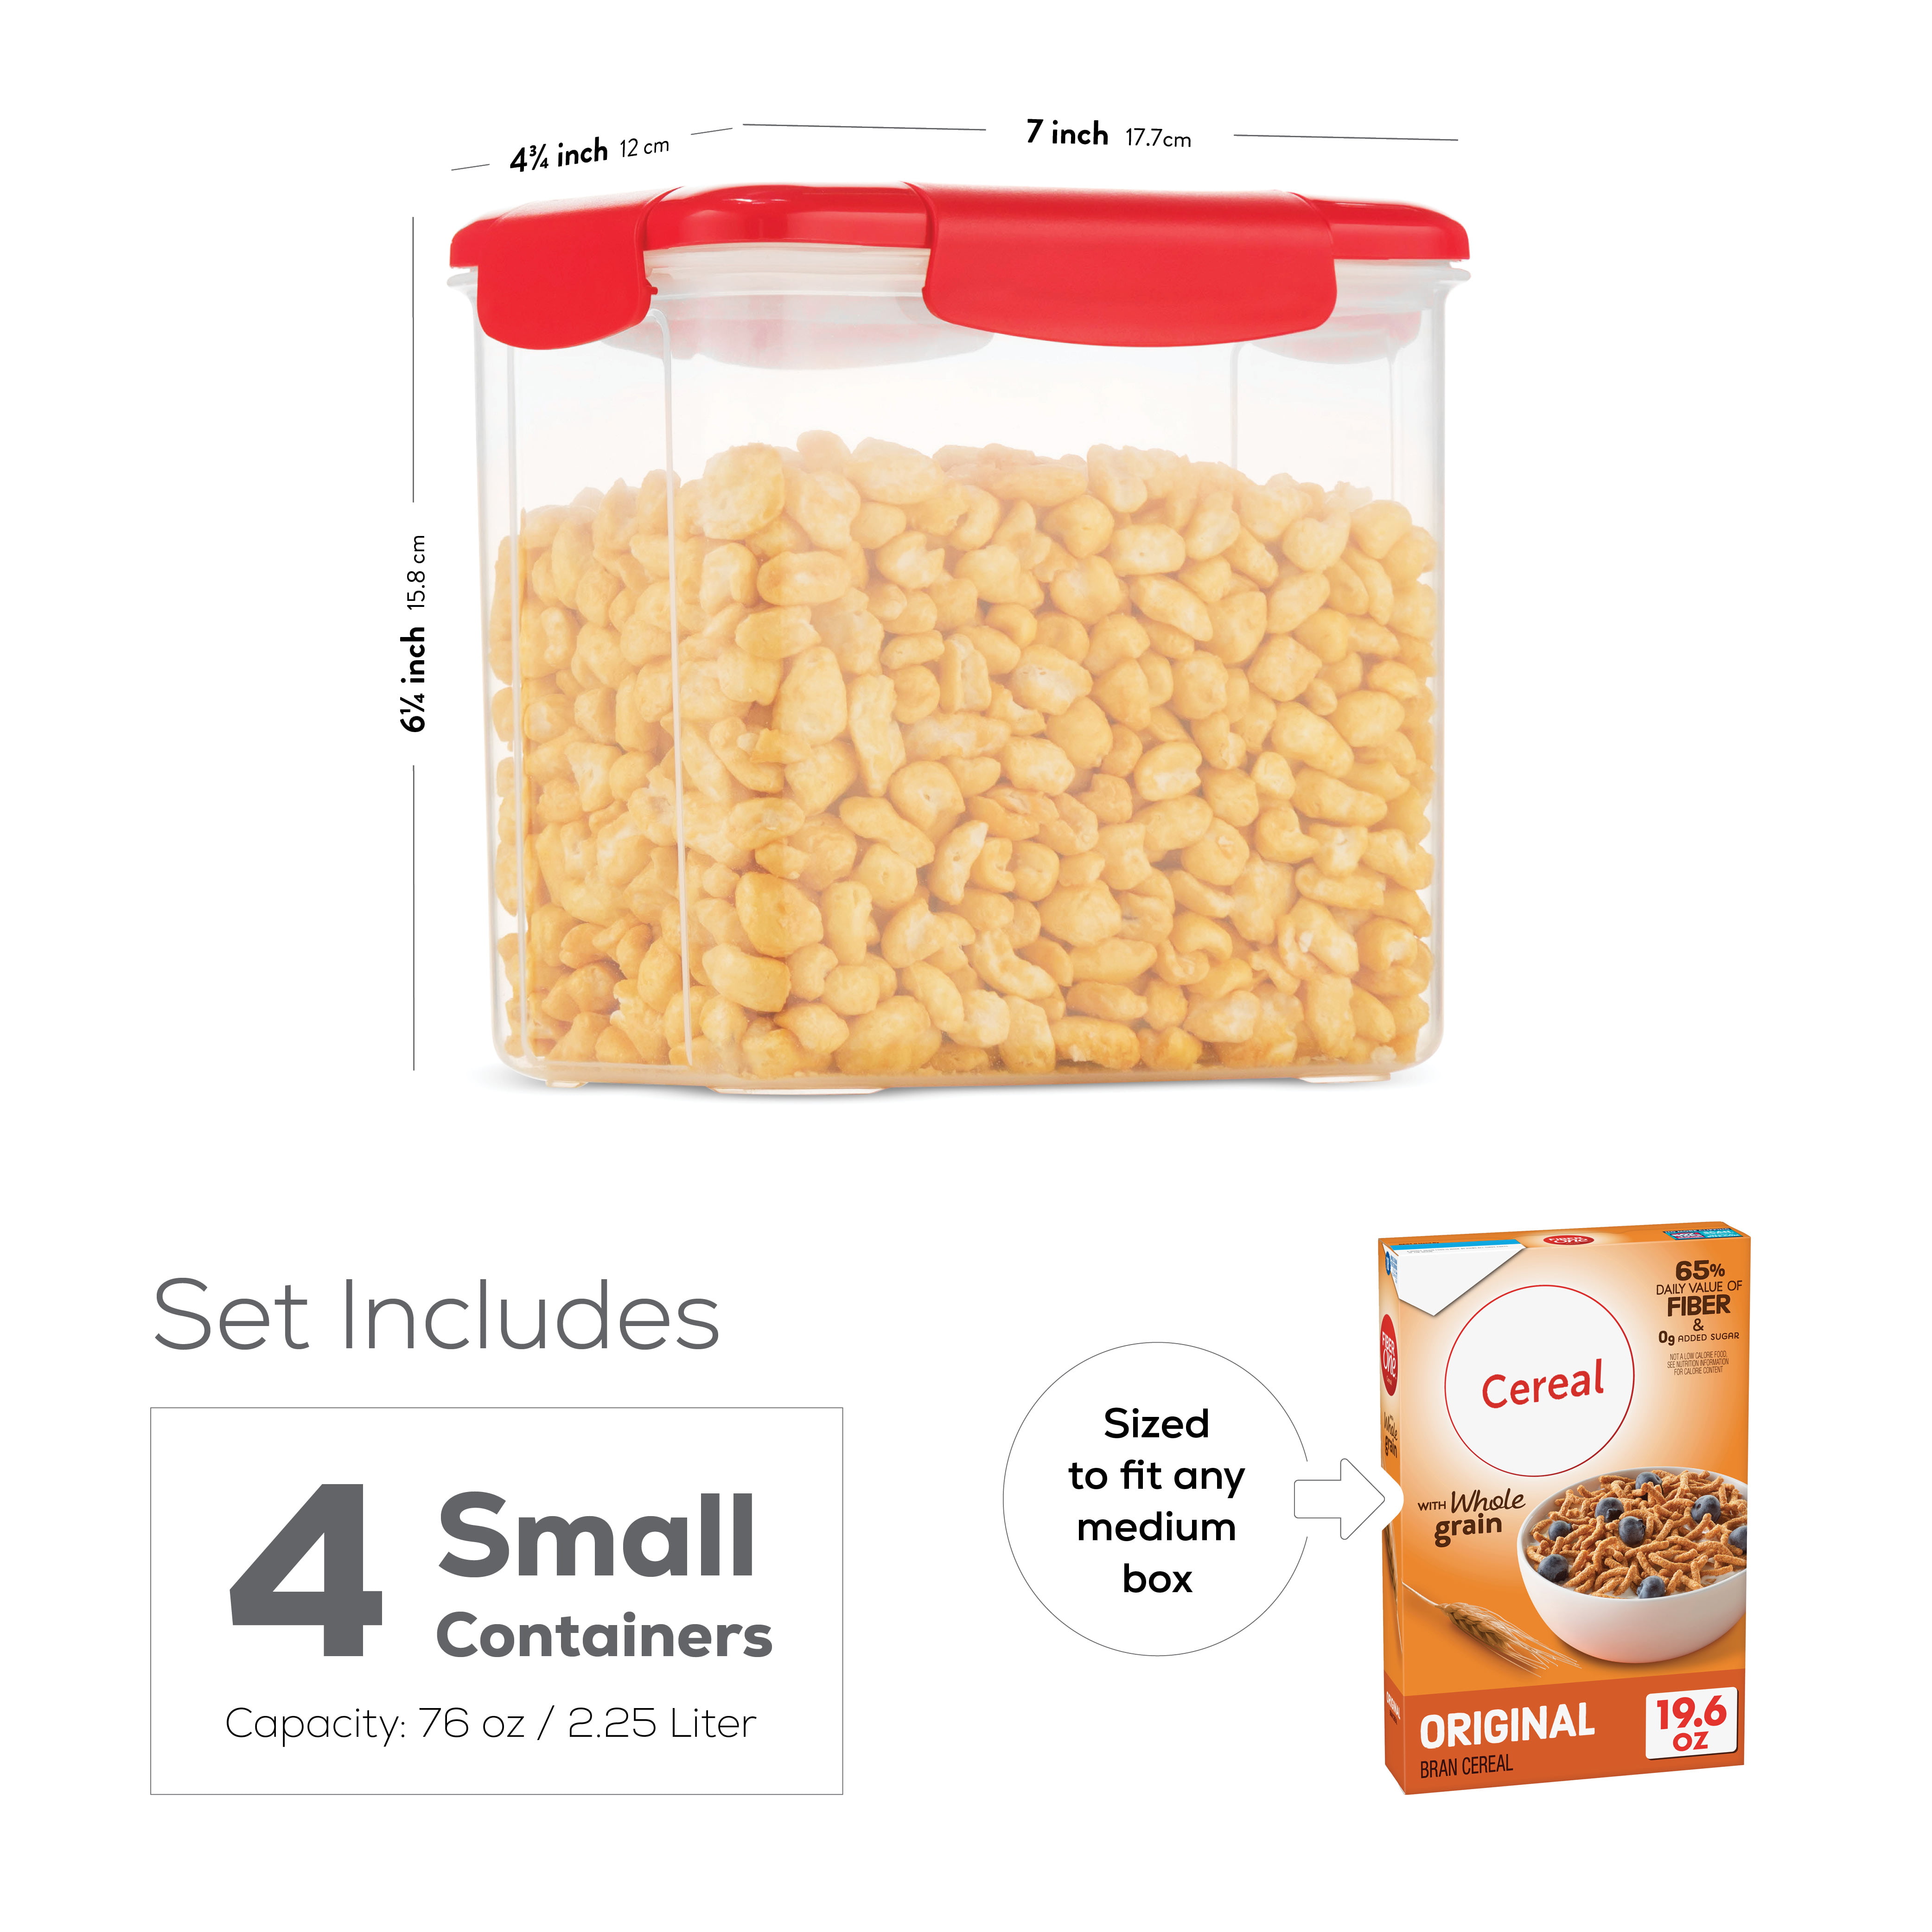 12-Piece Airtight Food Storage Containers With Lids - BPA FREE Plastic  Kitchen Pantry Storage Containers - Dry-Food-Storage Containers Set For  Flour, Cereal, Sugar, Coffee, Rice, Nuts, Snacks Etc. 